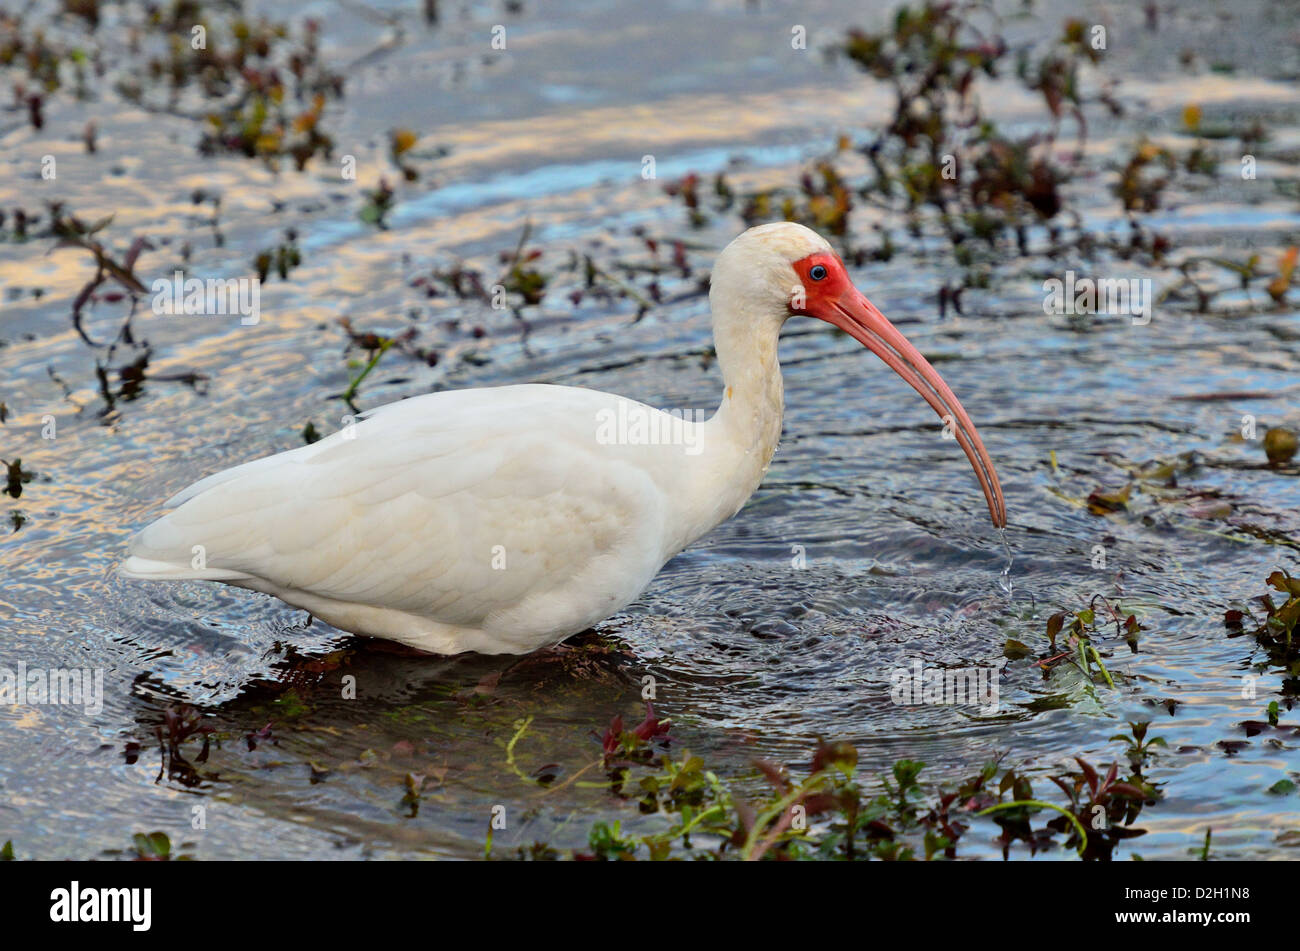 A white ibis wading in swamp. The Everglades National Park, Florida, USA. Stock Photo